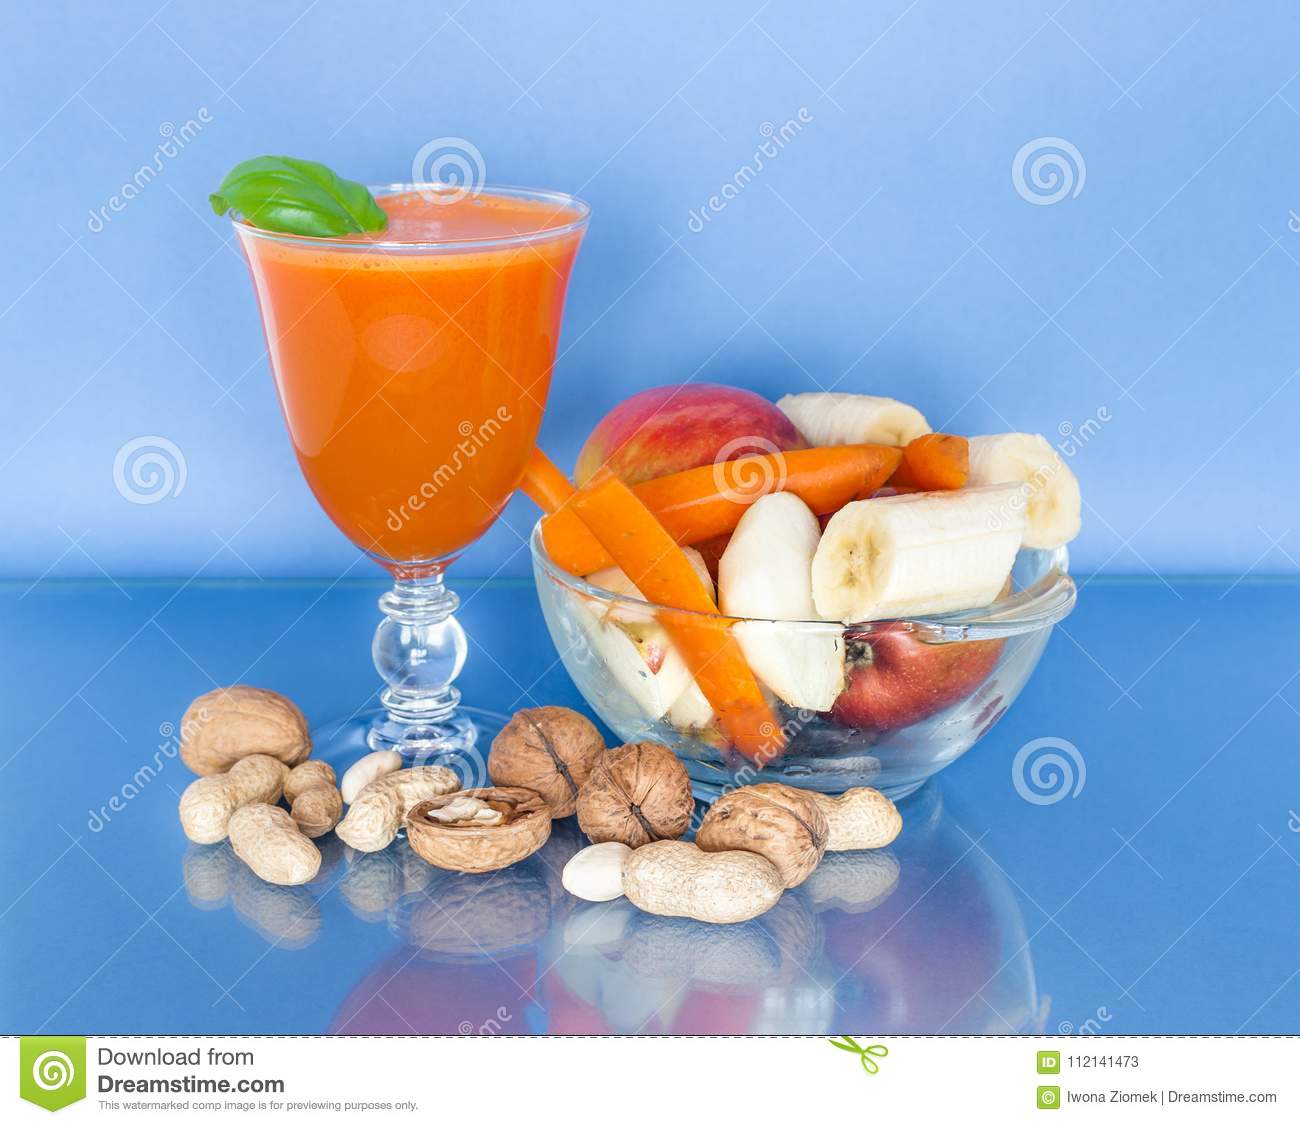 cup-carrot-juice-fresh-fruits